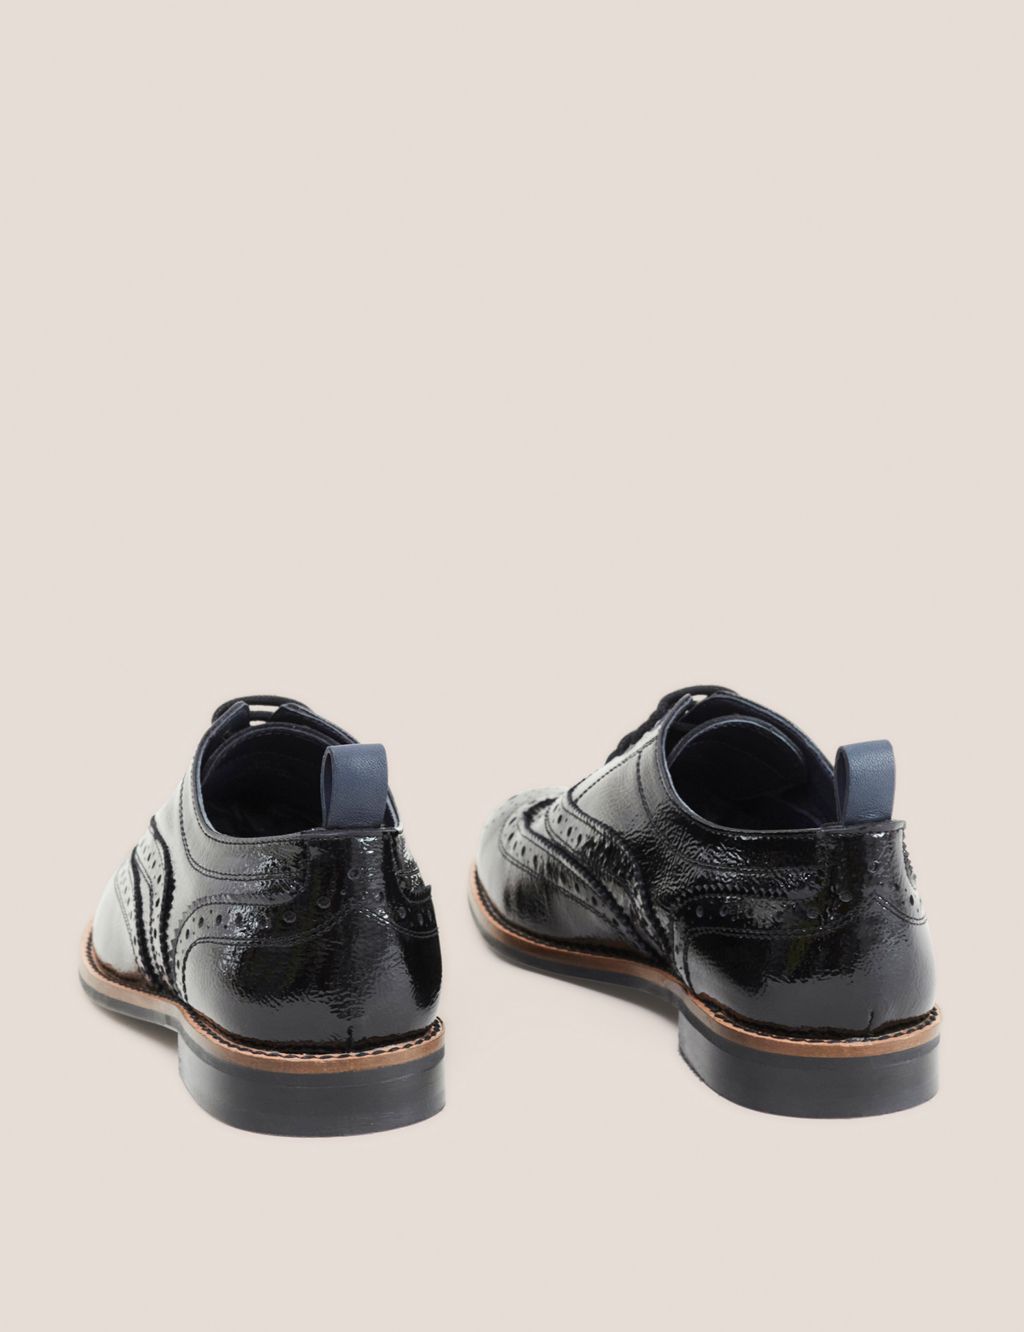 Leather Patent Lace Up Flat Brogues image 4